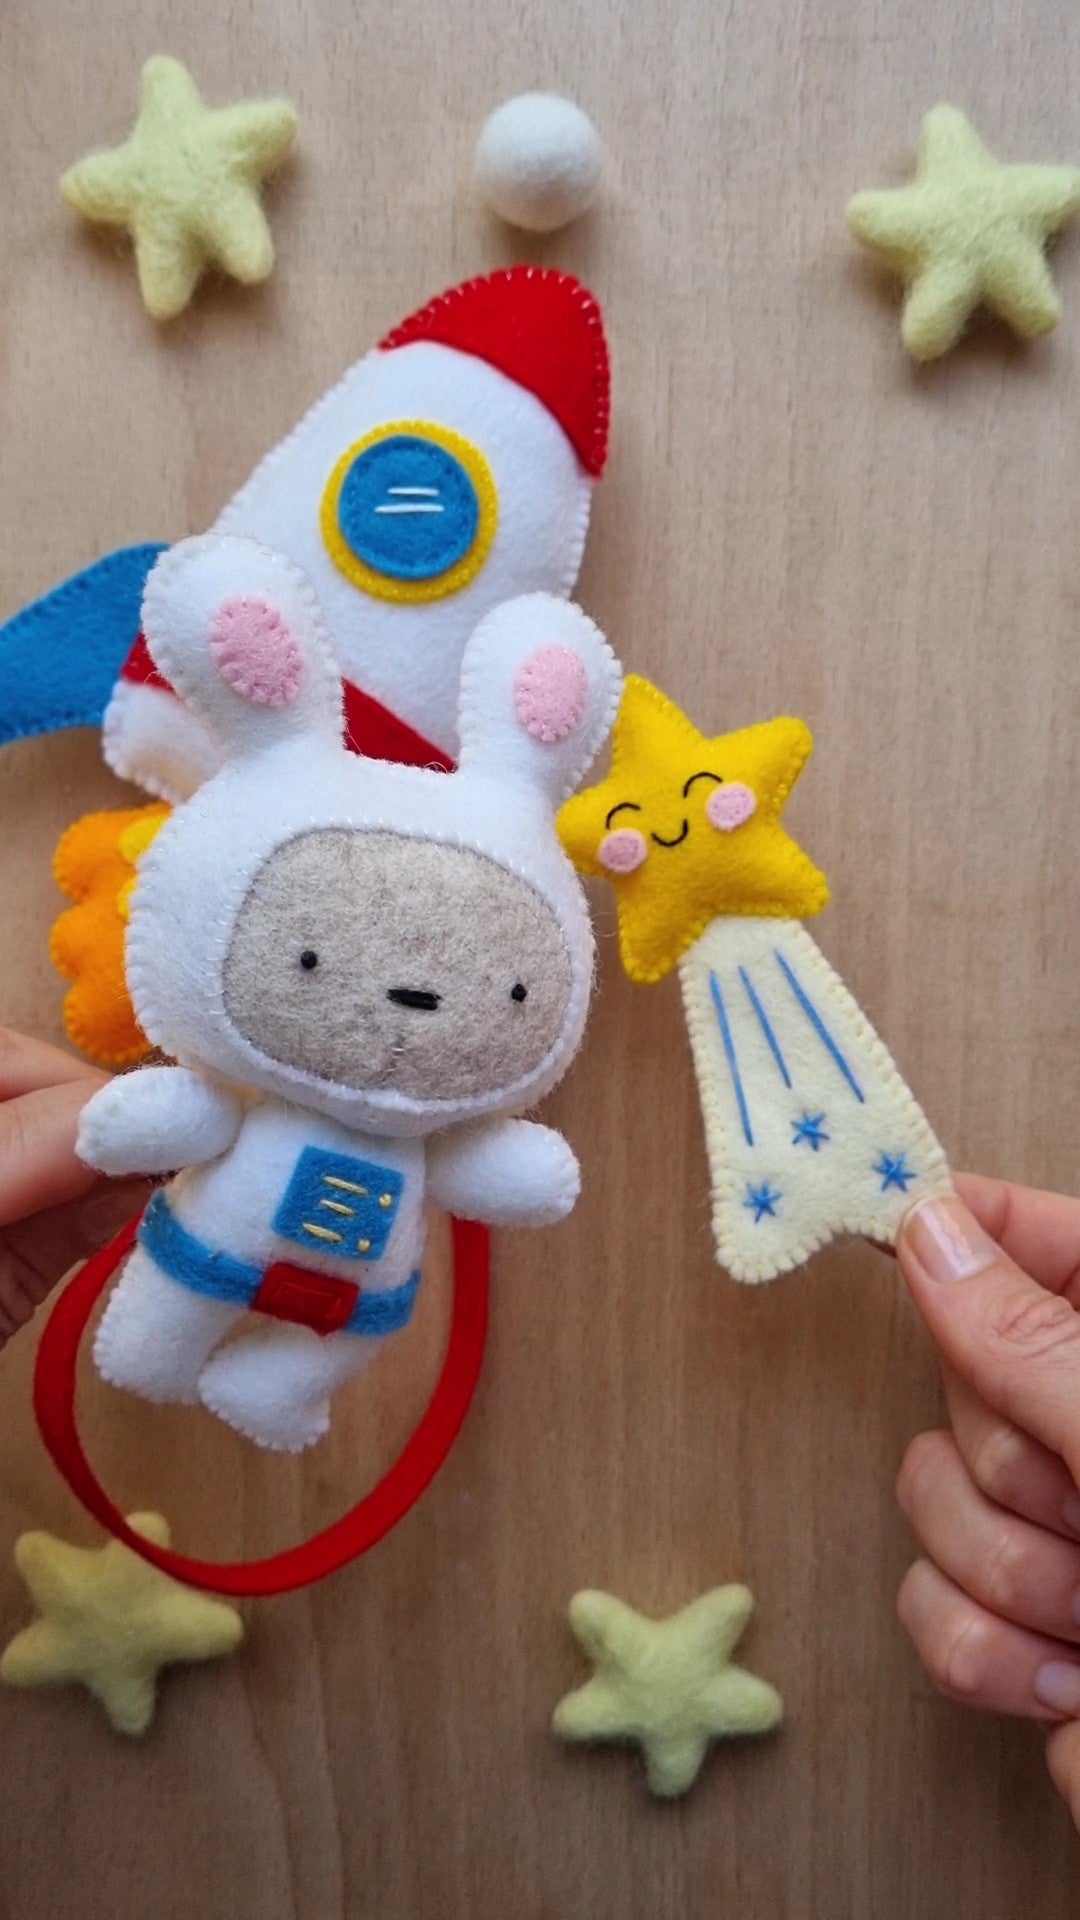 Bunny Astronaut Illustrated Tutorial and PDF Pattern